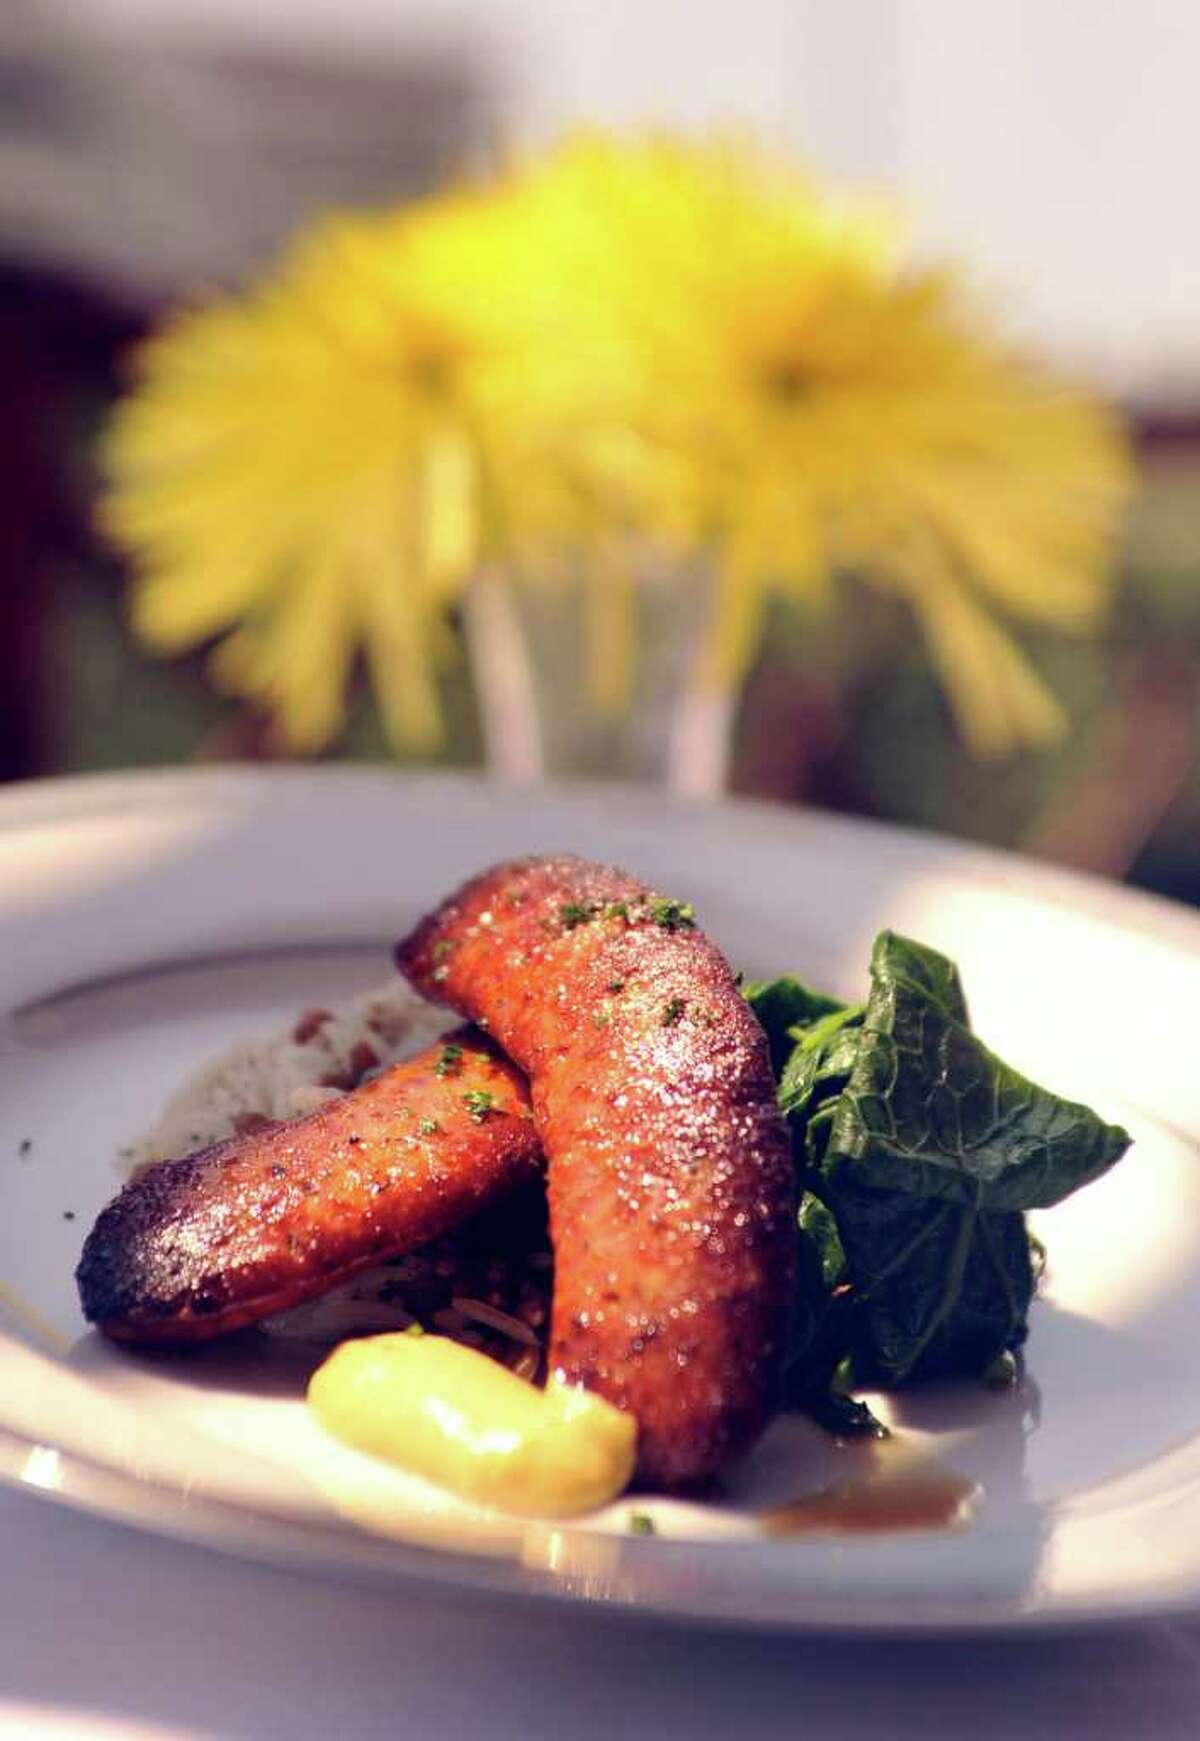 Spicy, smoked paprika sausage from Restaurant Gwendolyn.